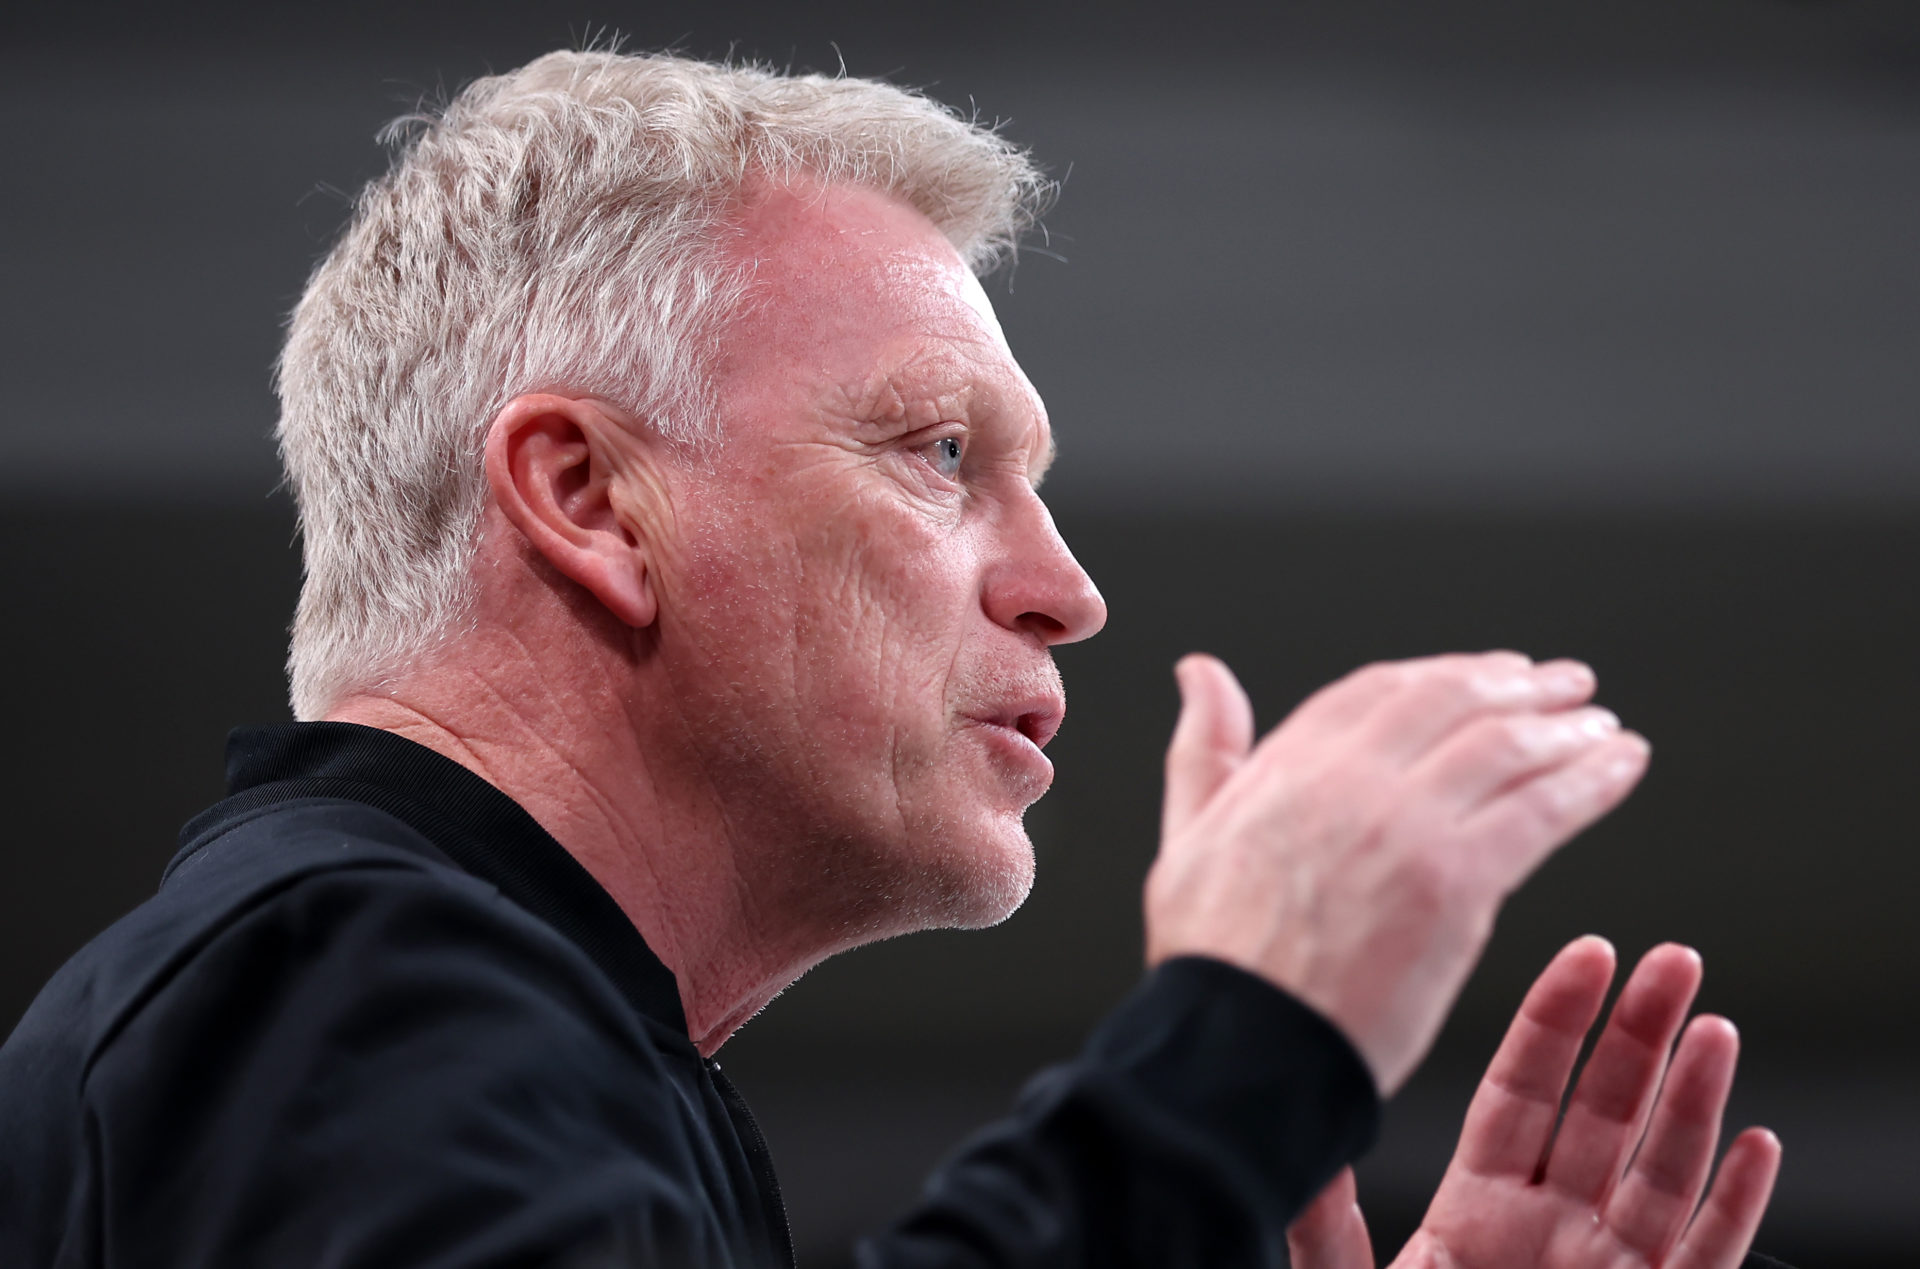 Moyes drops tantalising transfer update on late window signings